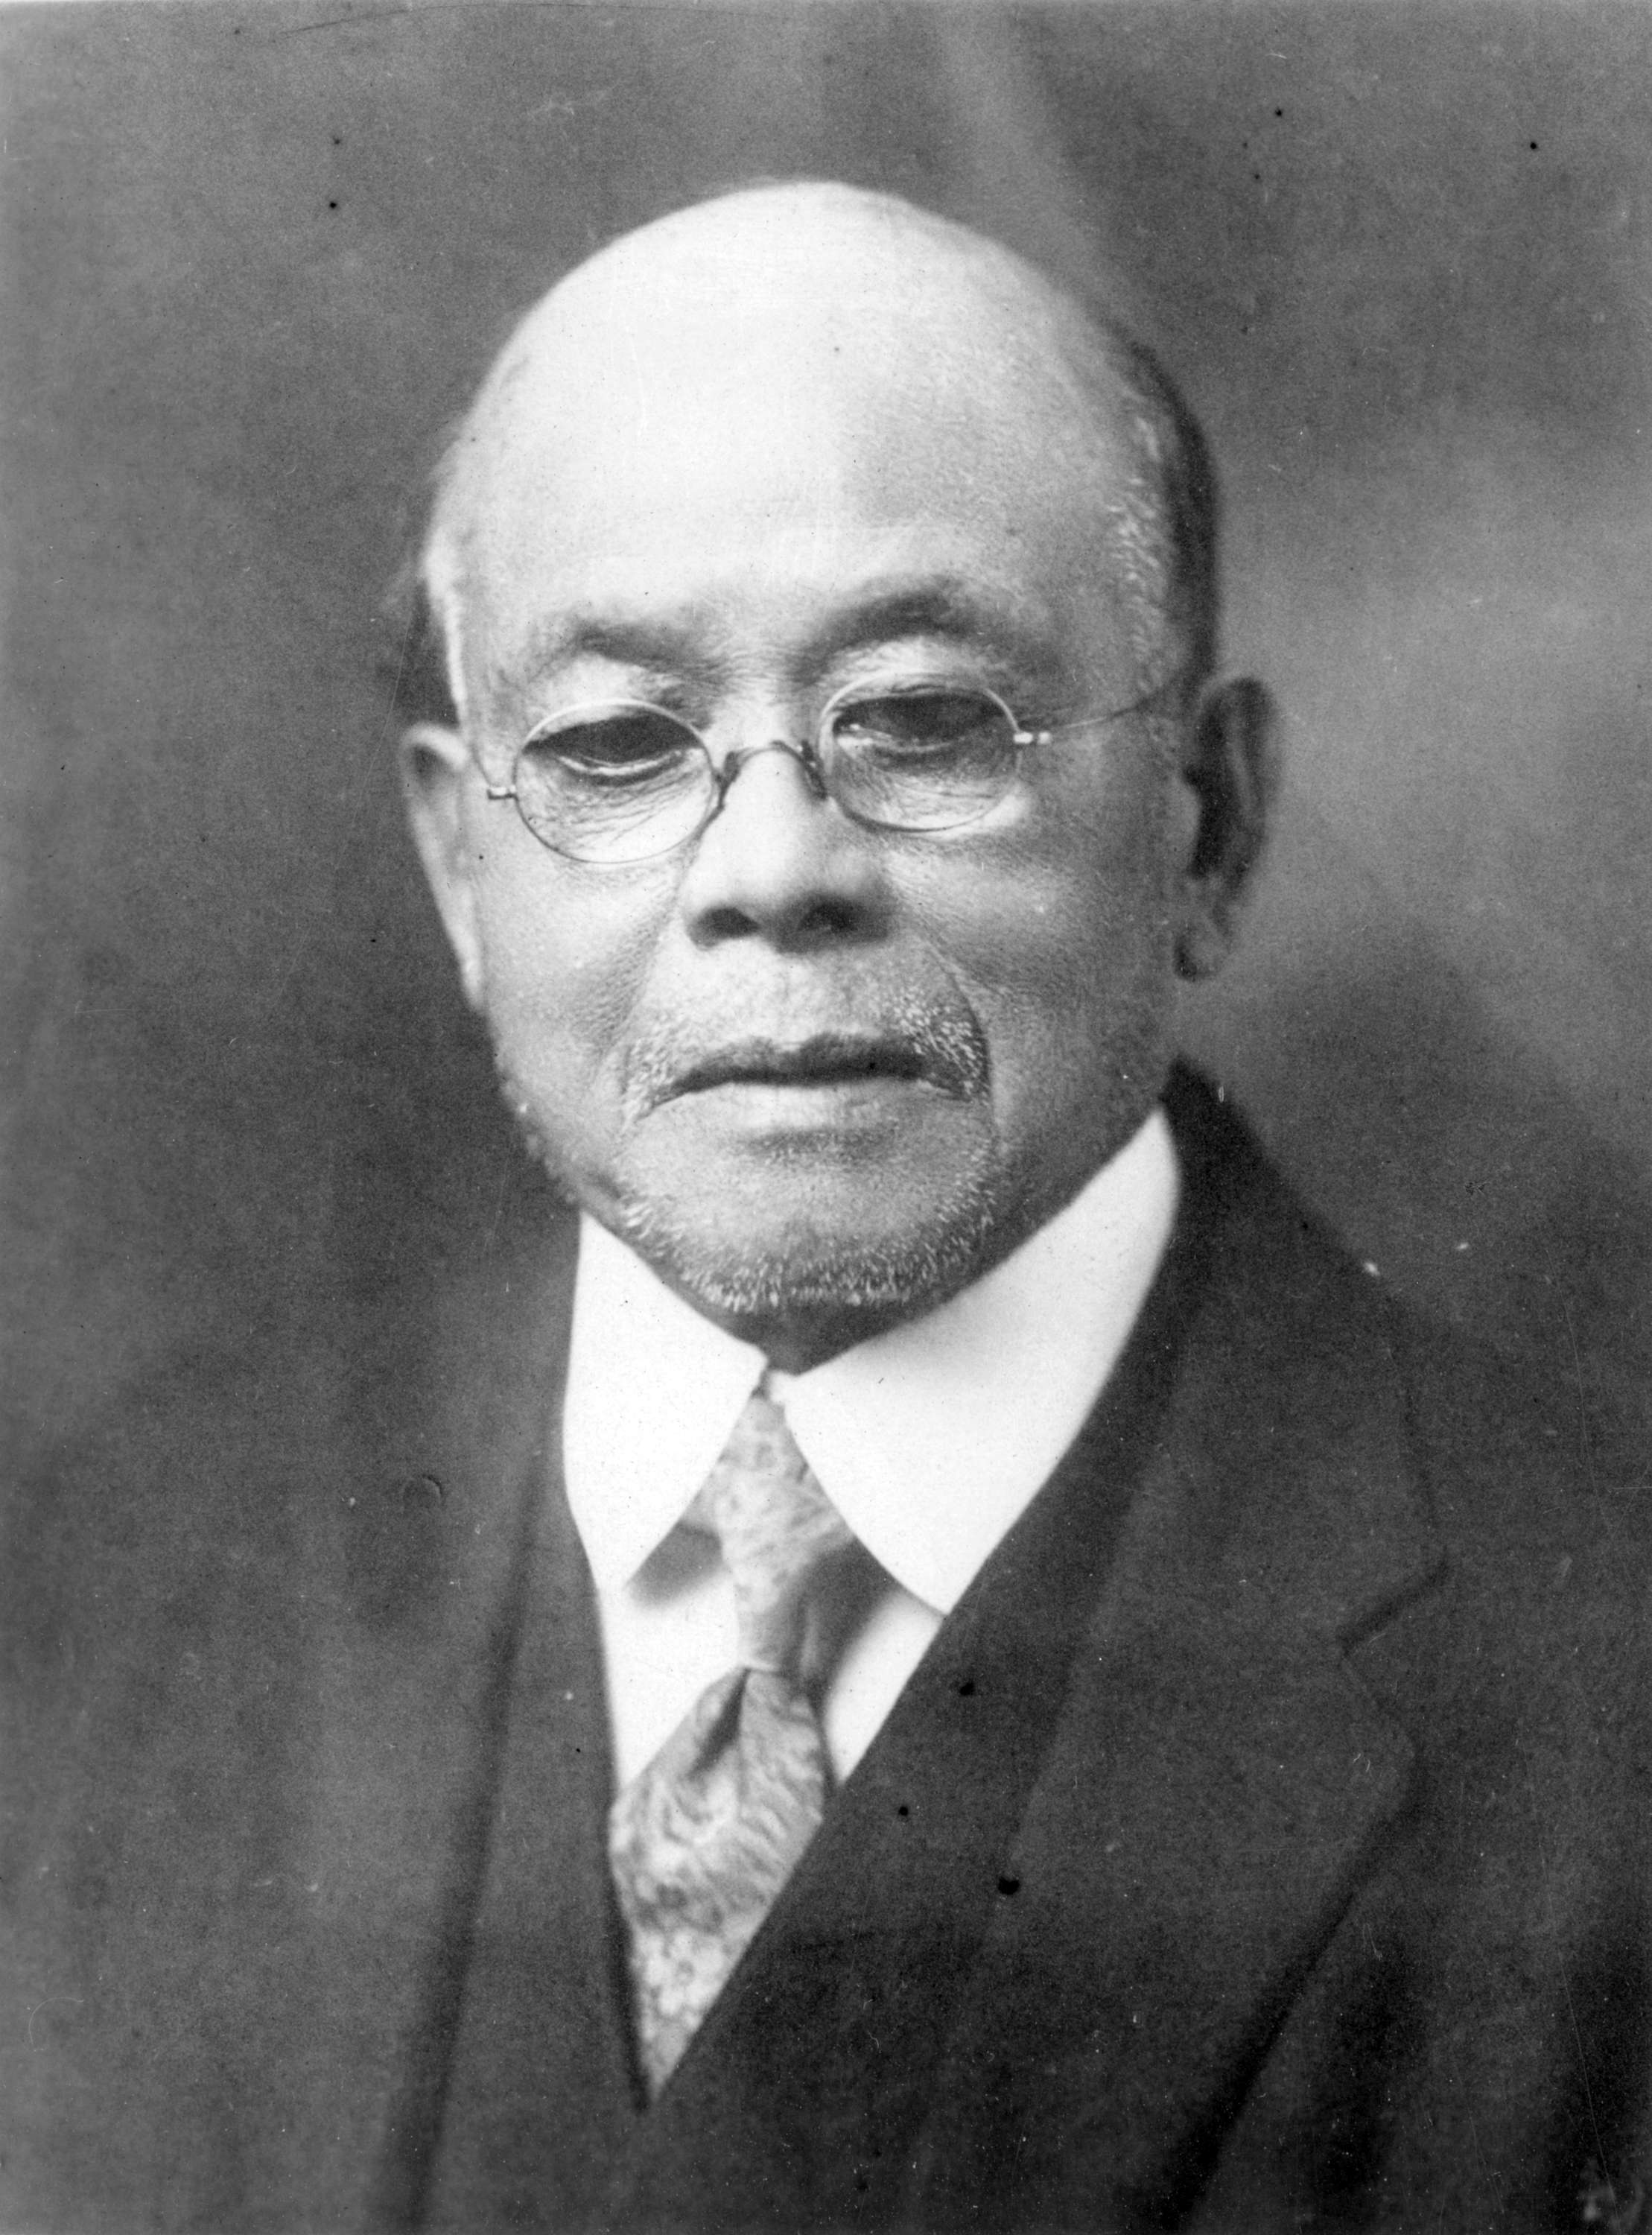 A black-and-white portrait of a senior ethnically Chinese man. He is wearing glasses and a western suit.